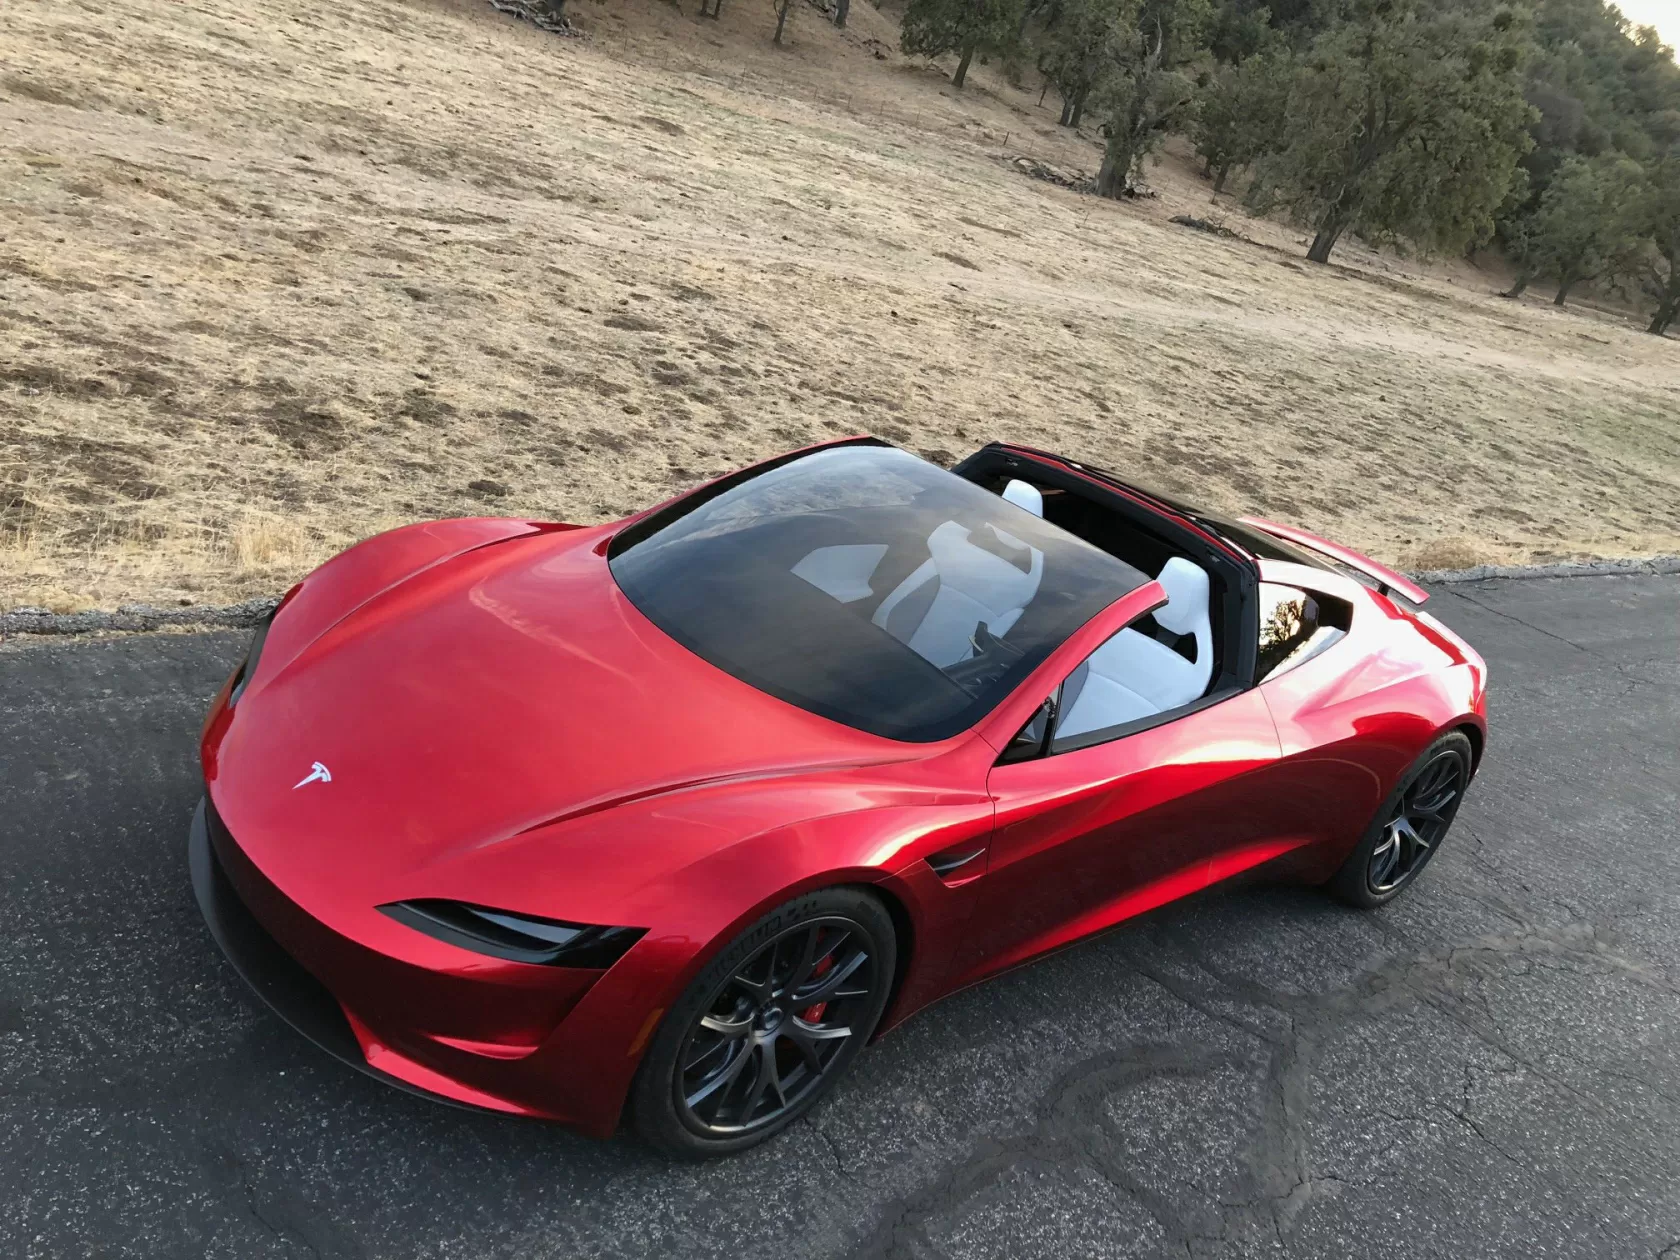 Tesla's $200,000 new Roadster will be the fastest production car ever